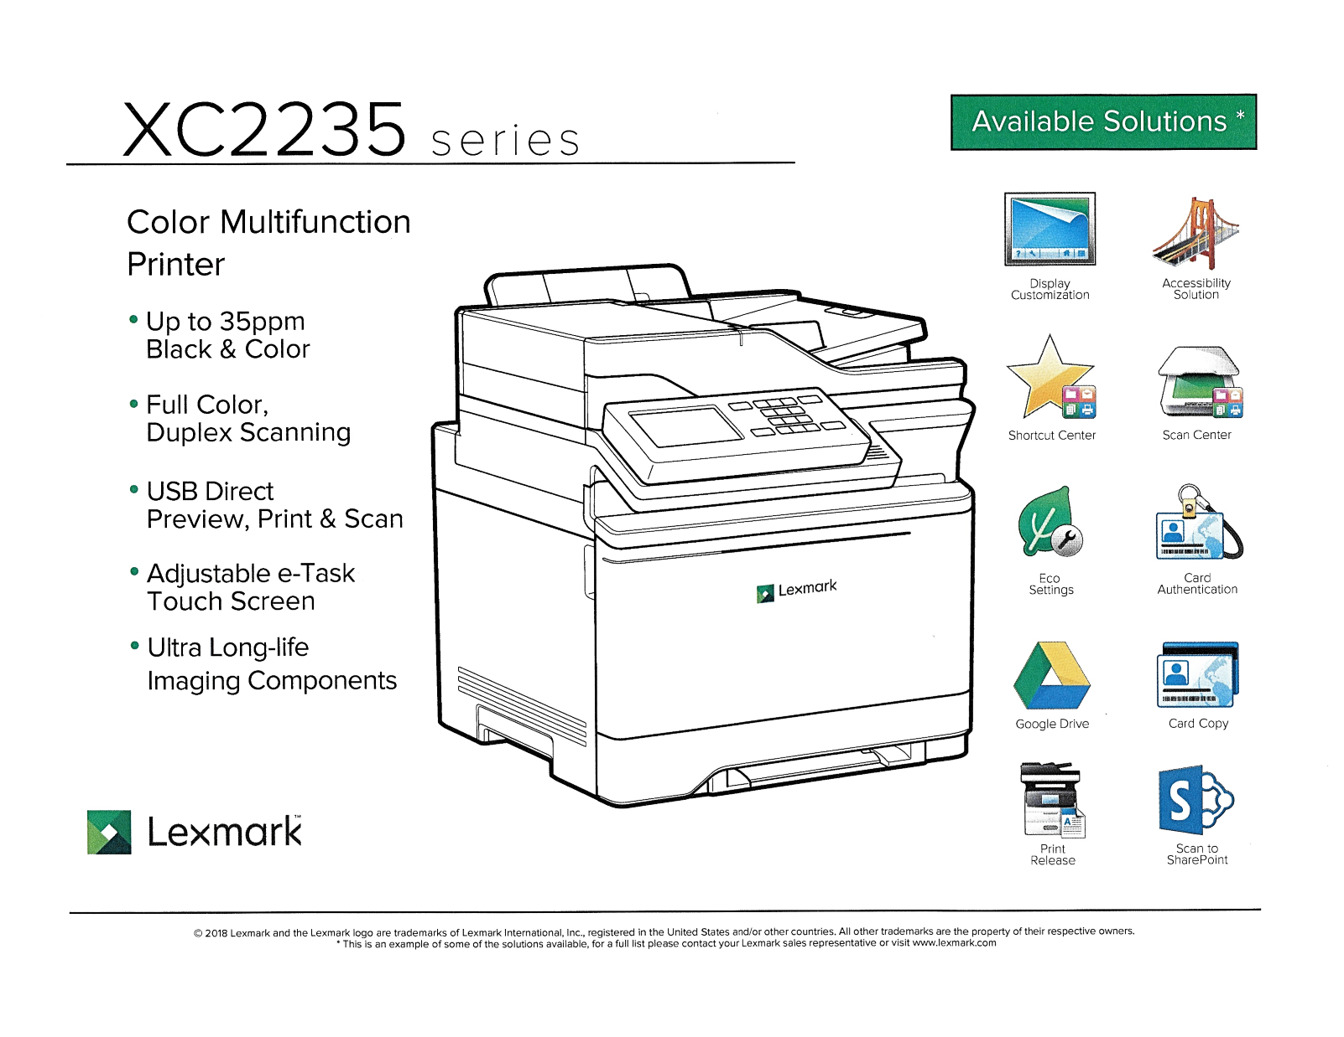 XC2235 Series Multifunction Printer from Lexmark and Duplicated Business Solutions Full